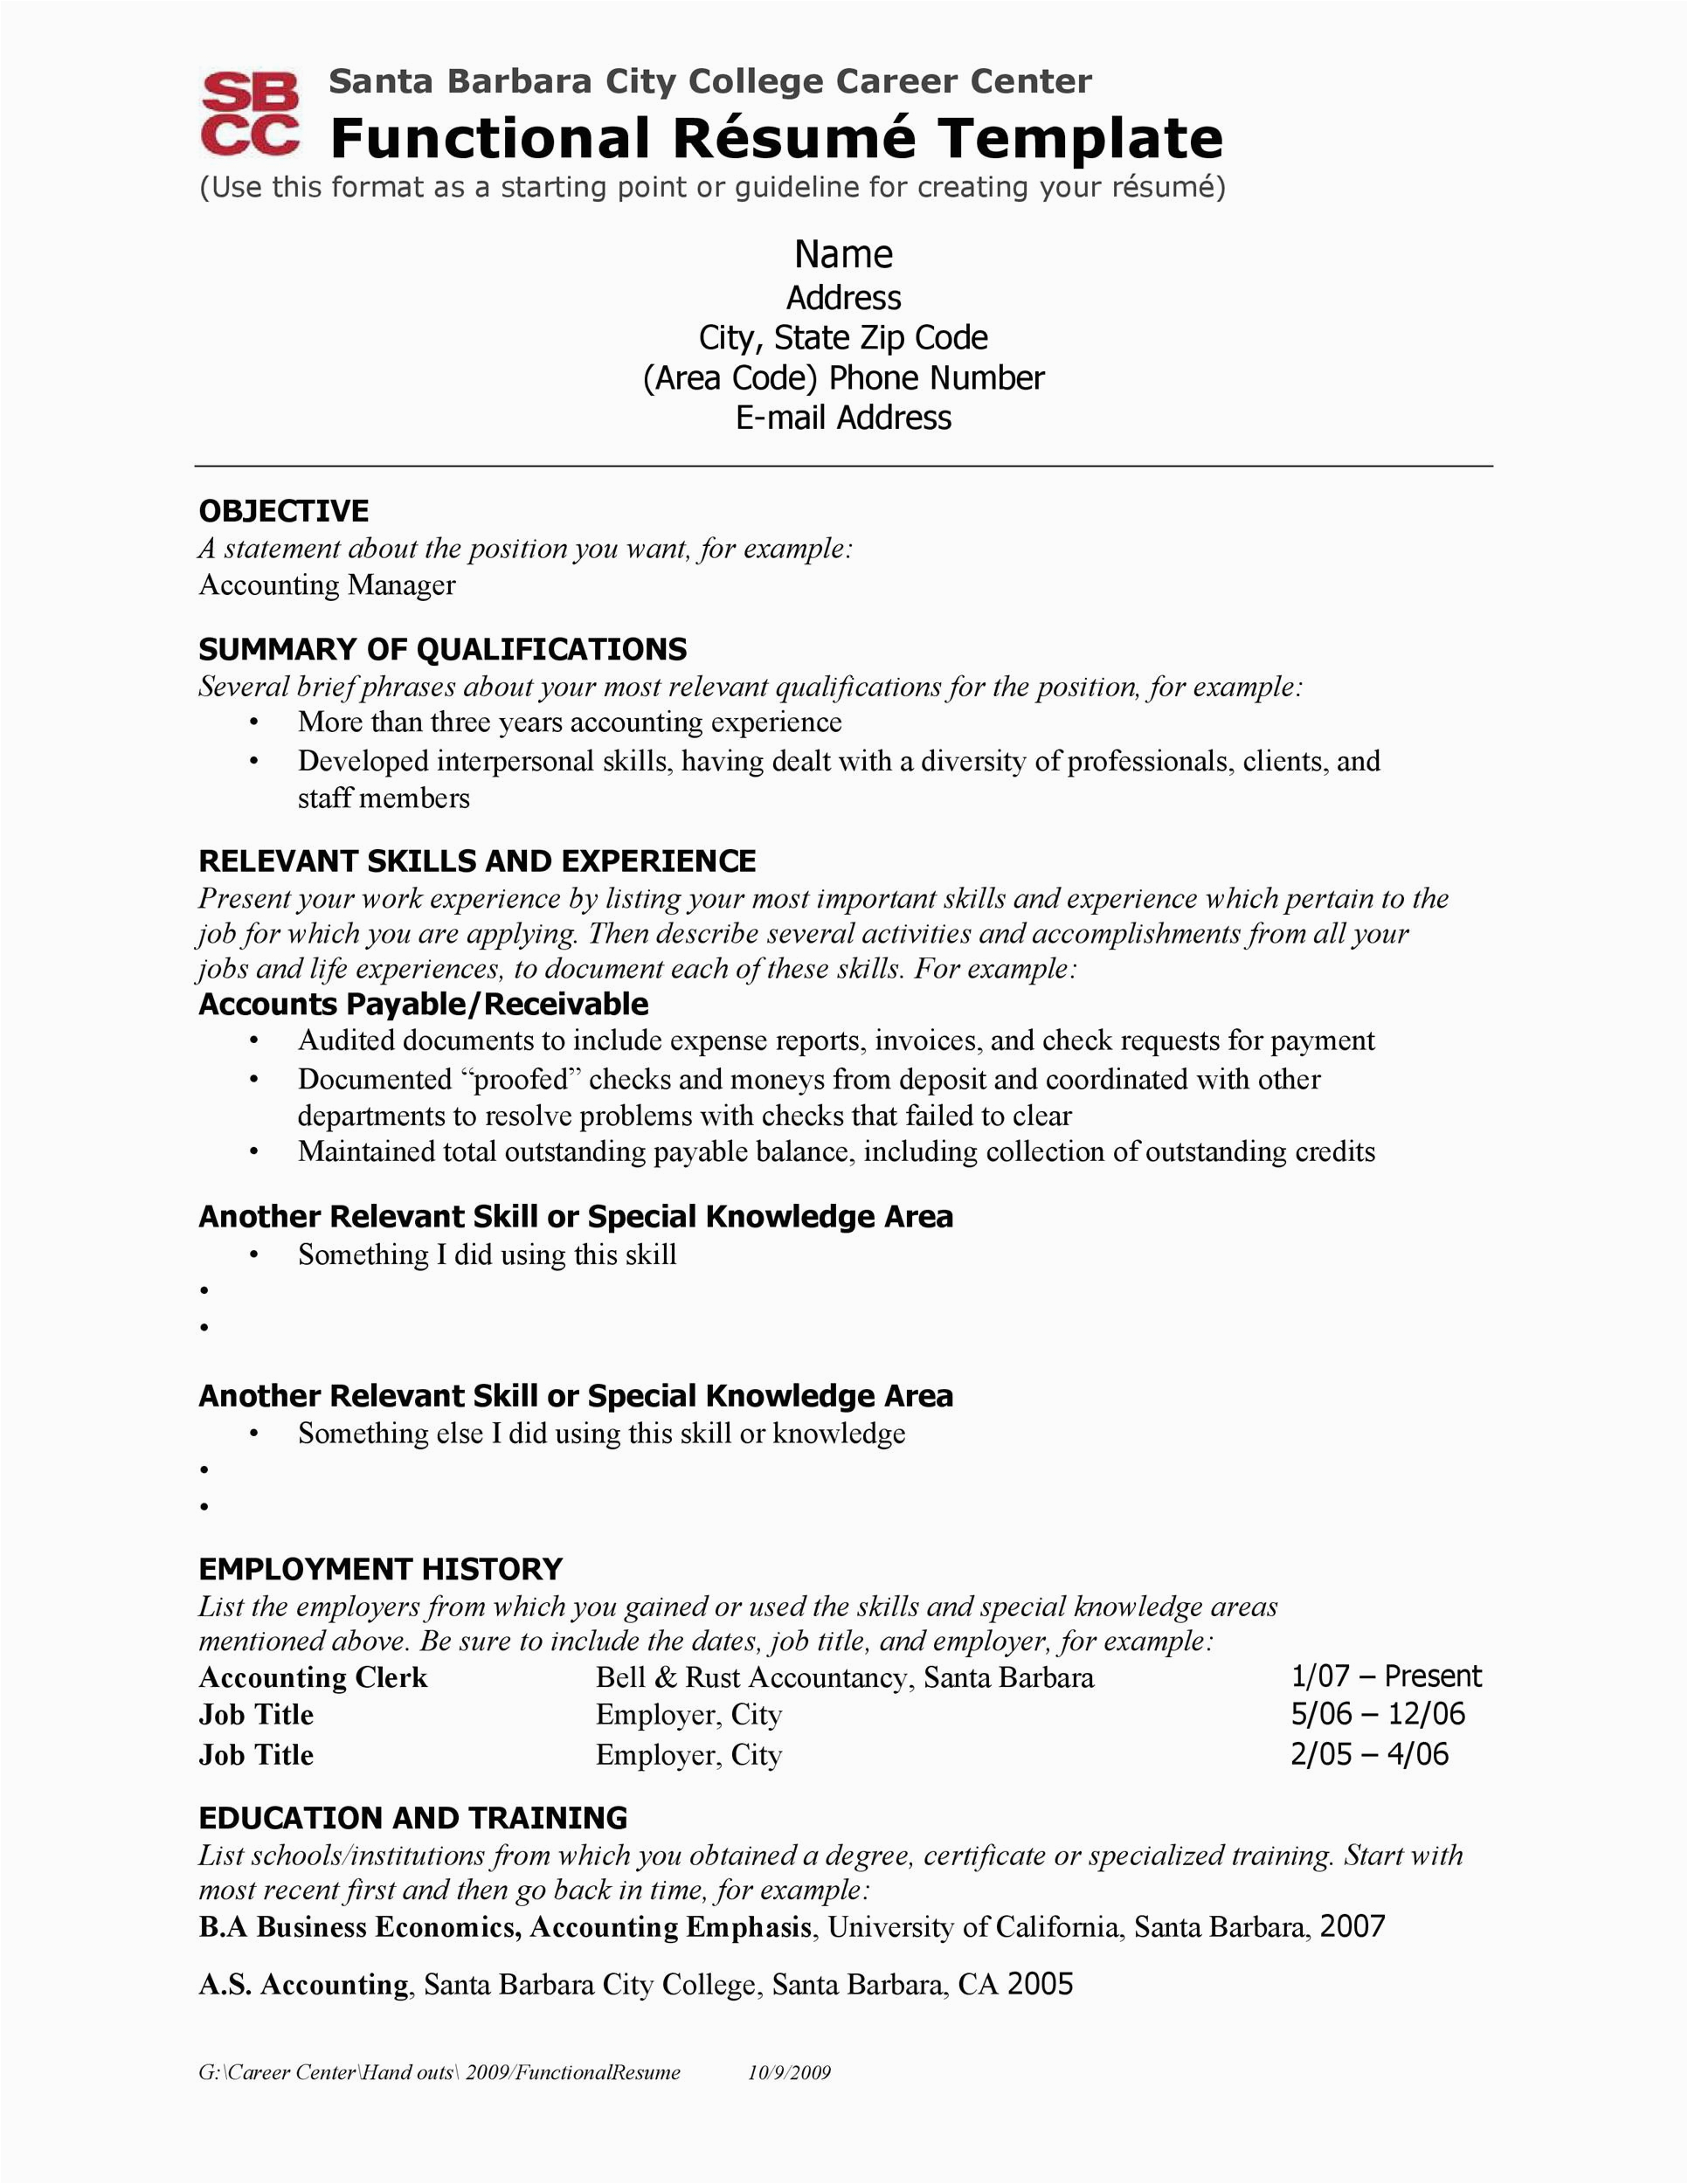 functional resume template for colege